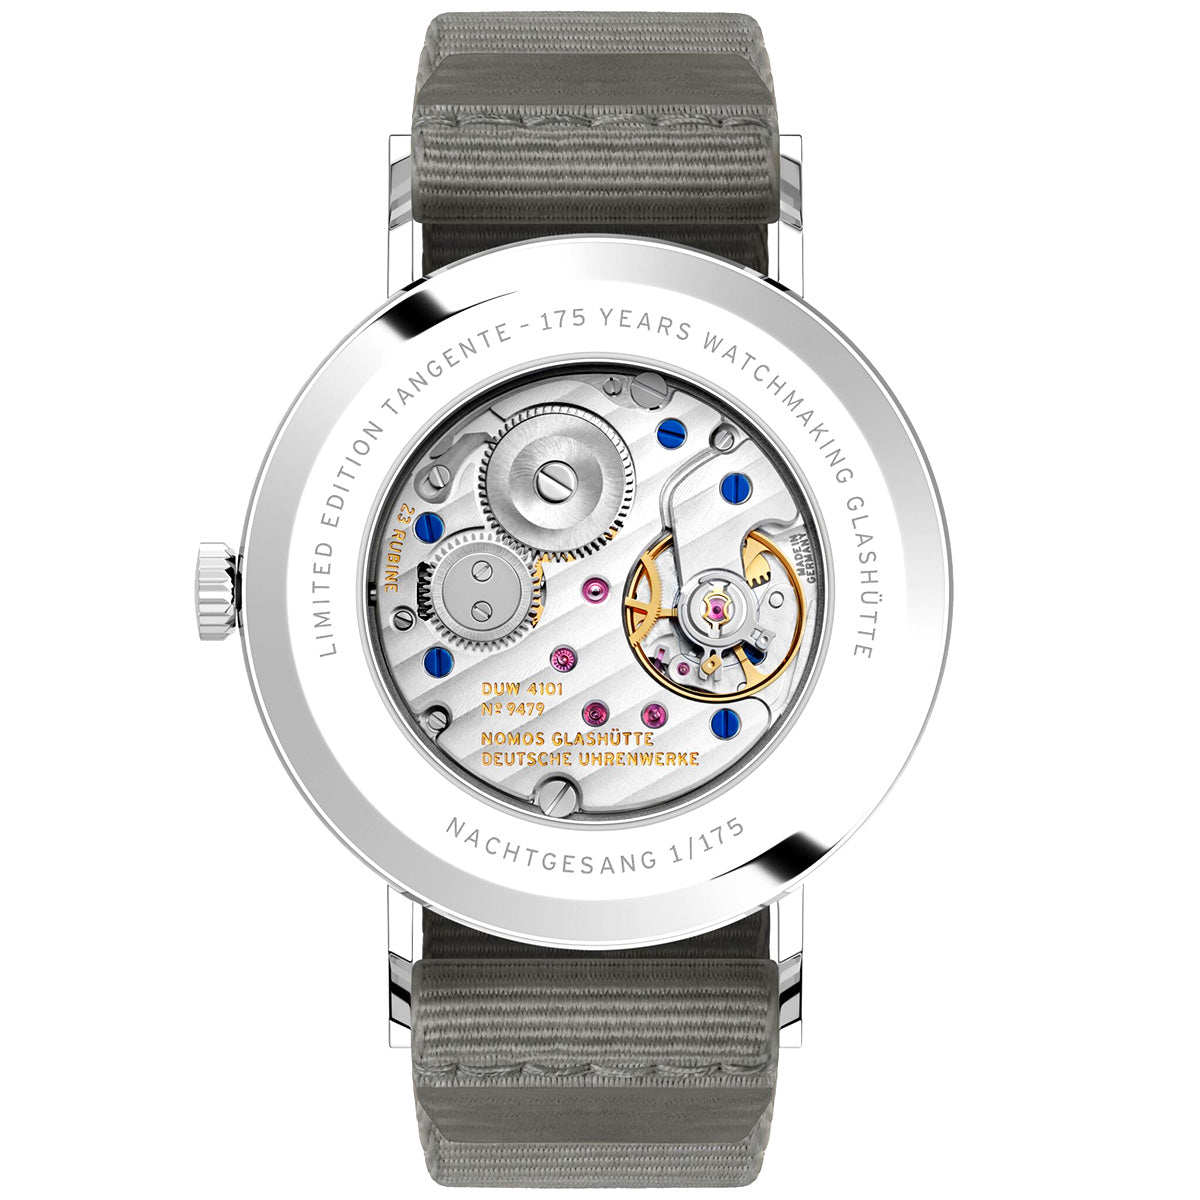 Tangente 38mm 'Nachtgesang' Limited Edition Watch